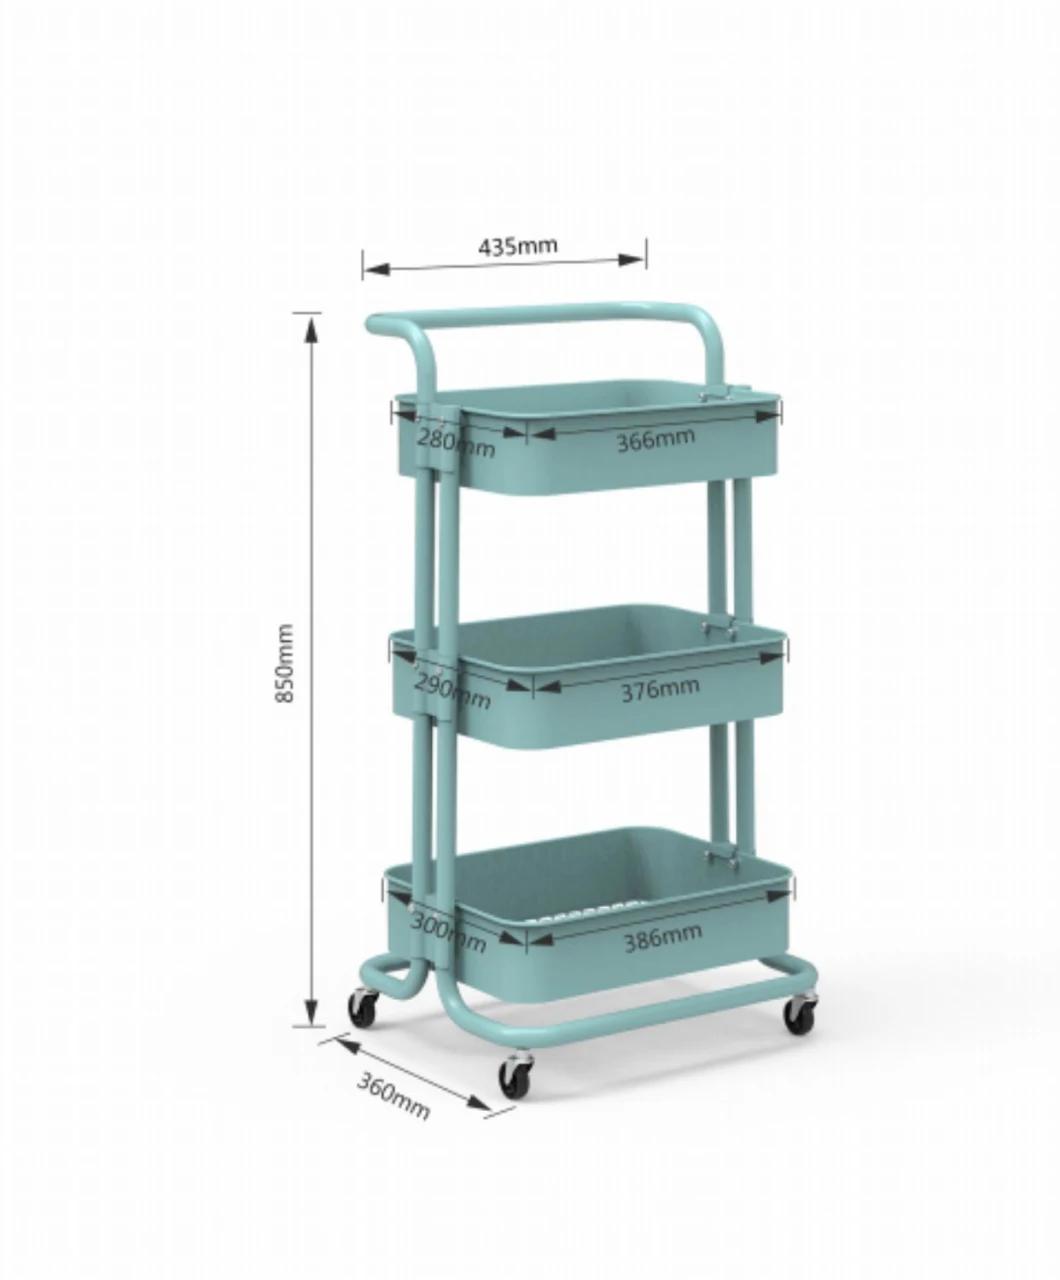 Amazon Hot Selling Kitchen Cart Hotel Foldable Three Layers ABS Storage Trolley Cart with Wheels